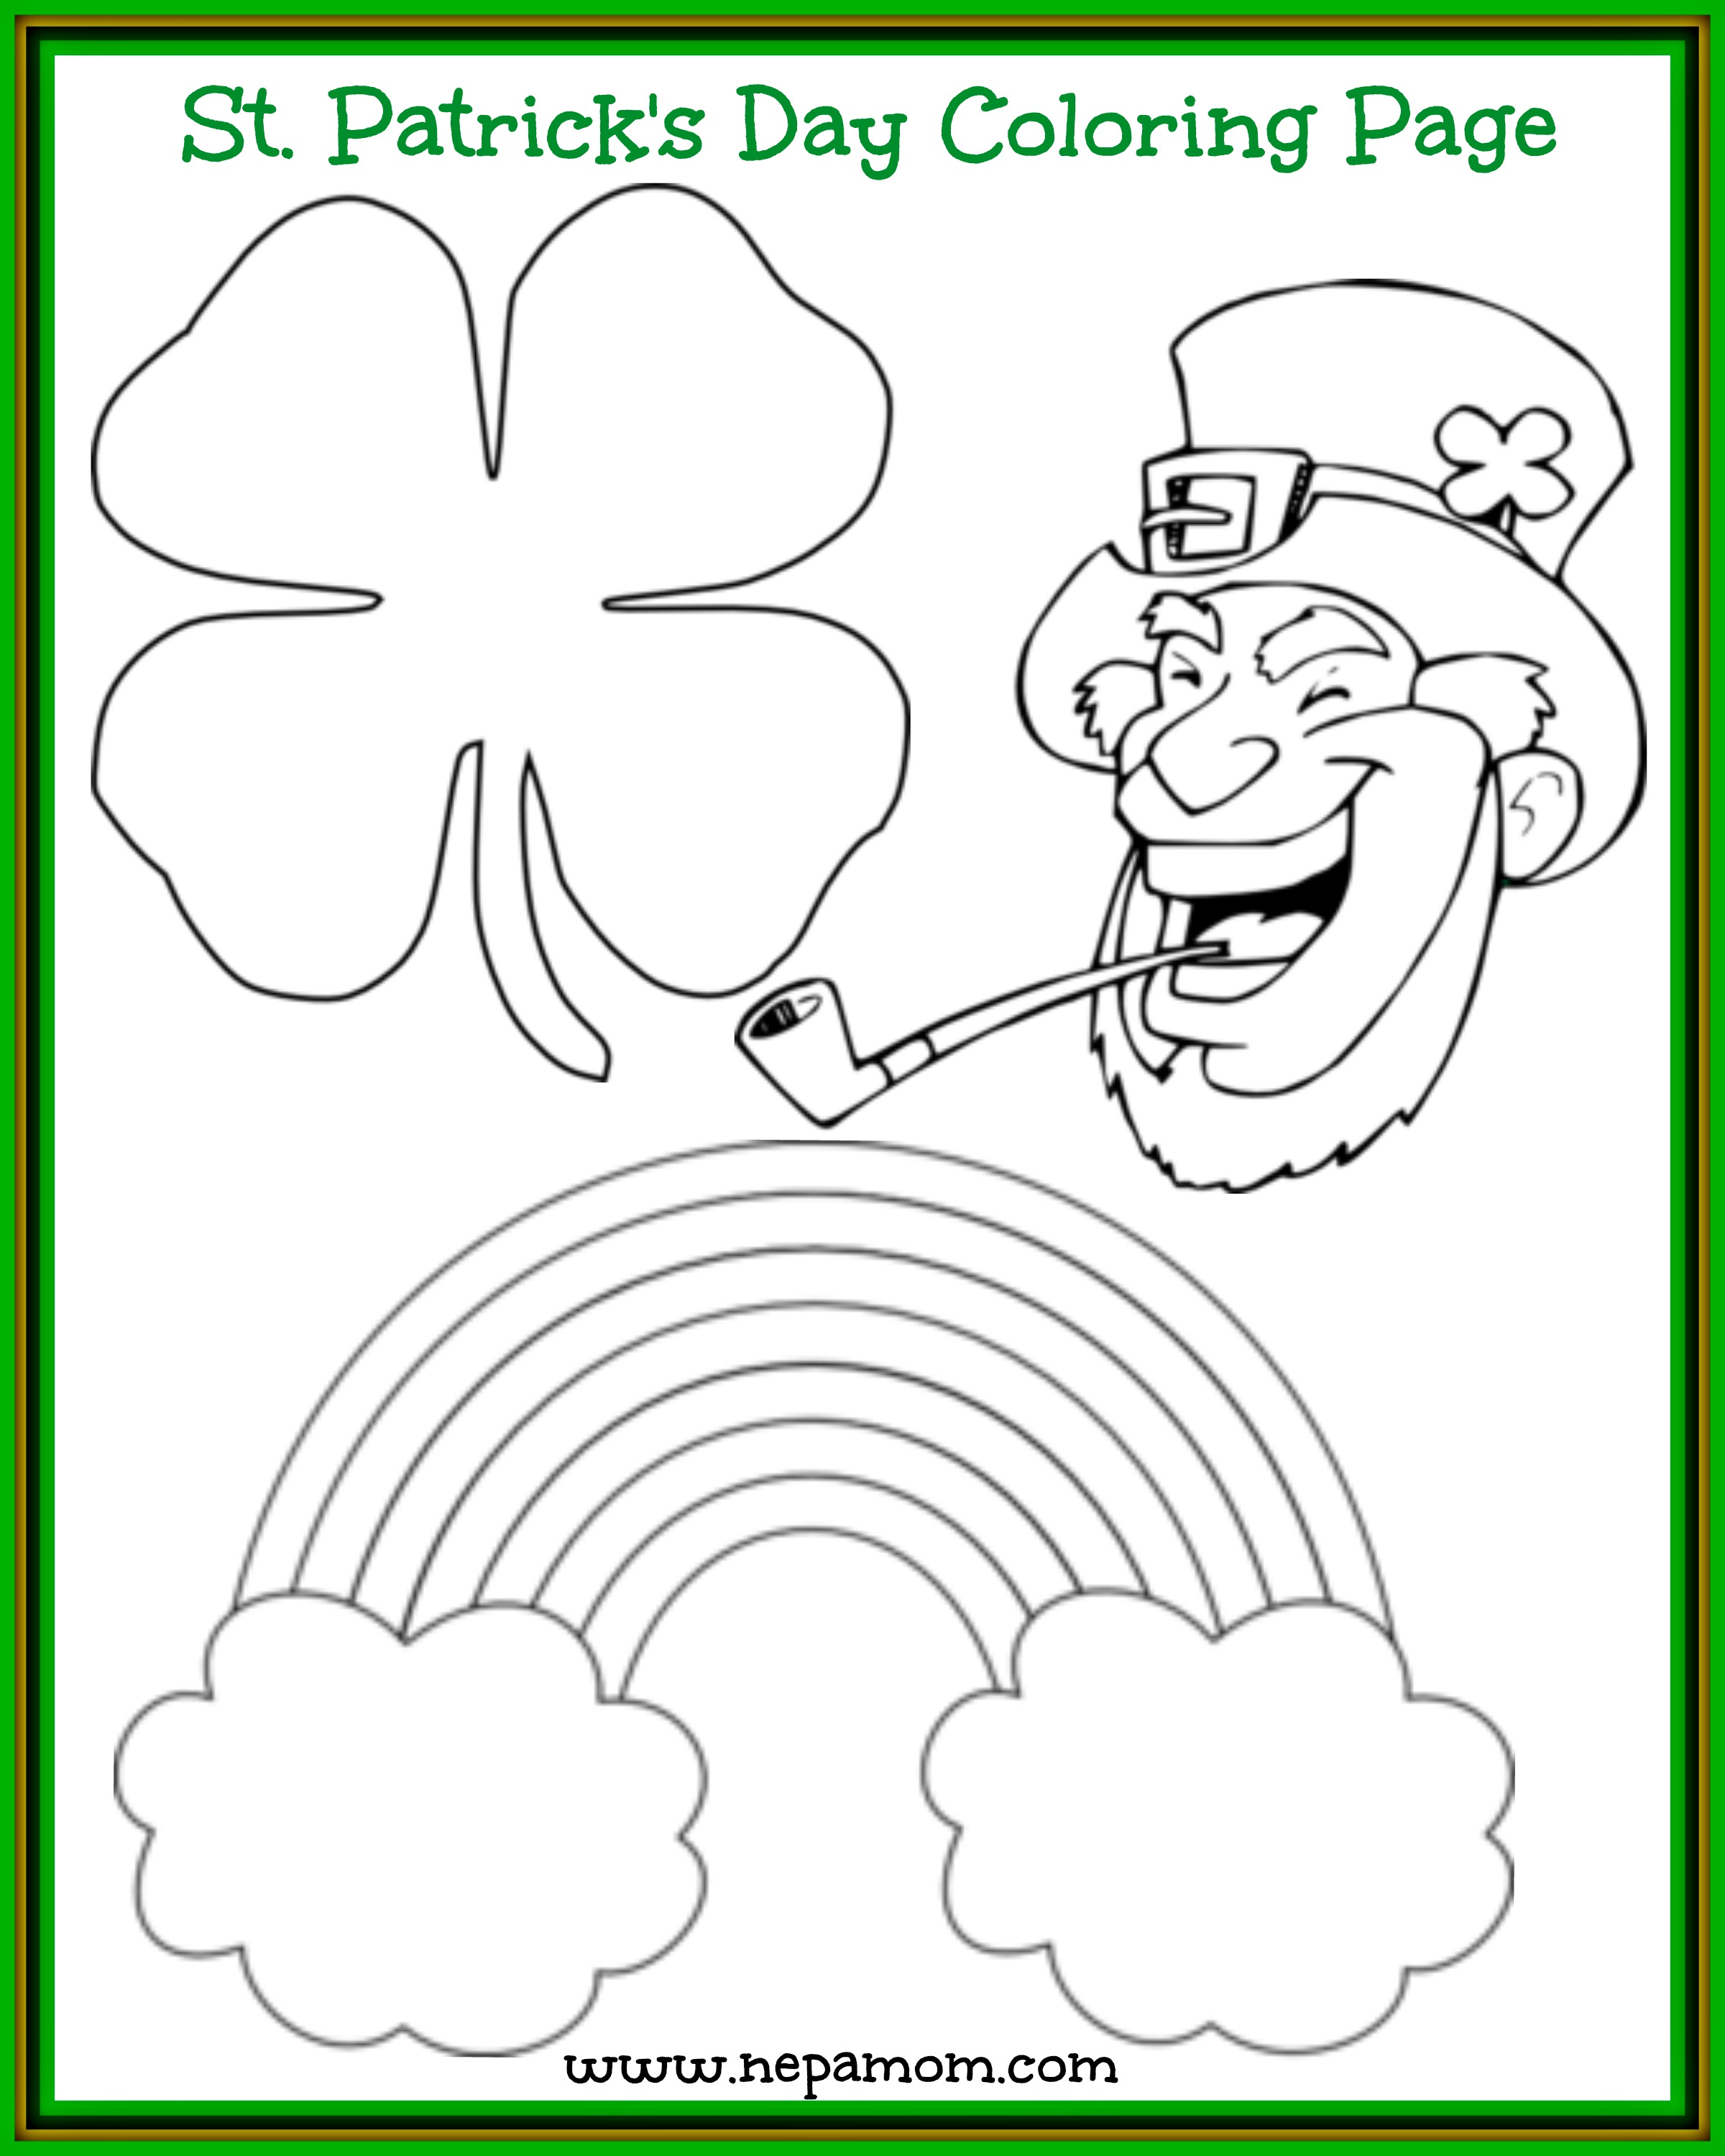 St Patrick's Day Coloring Page NEPA Mom